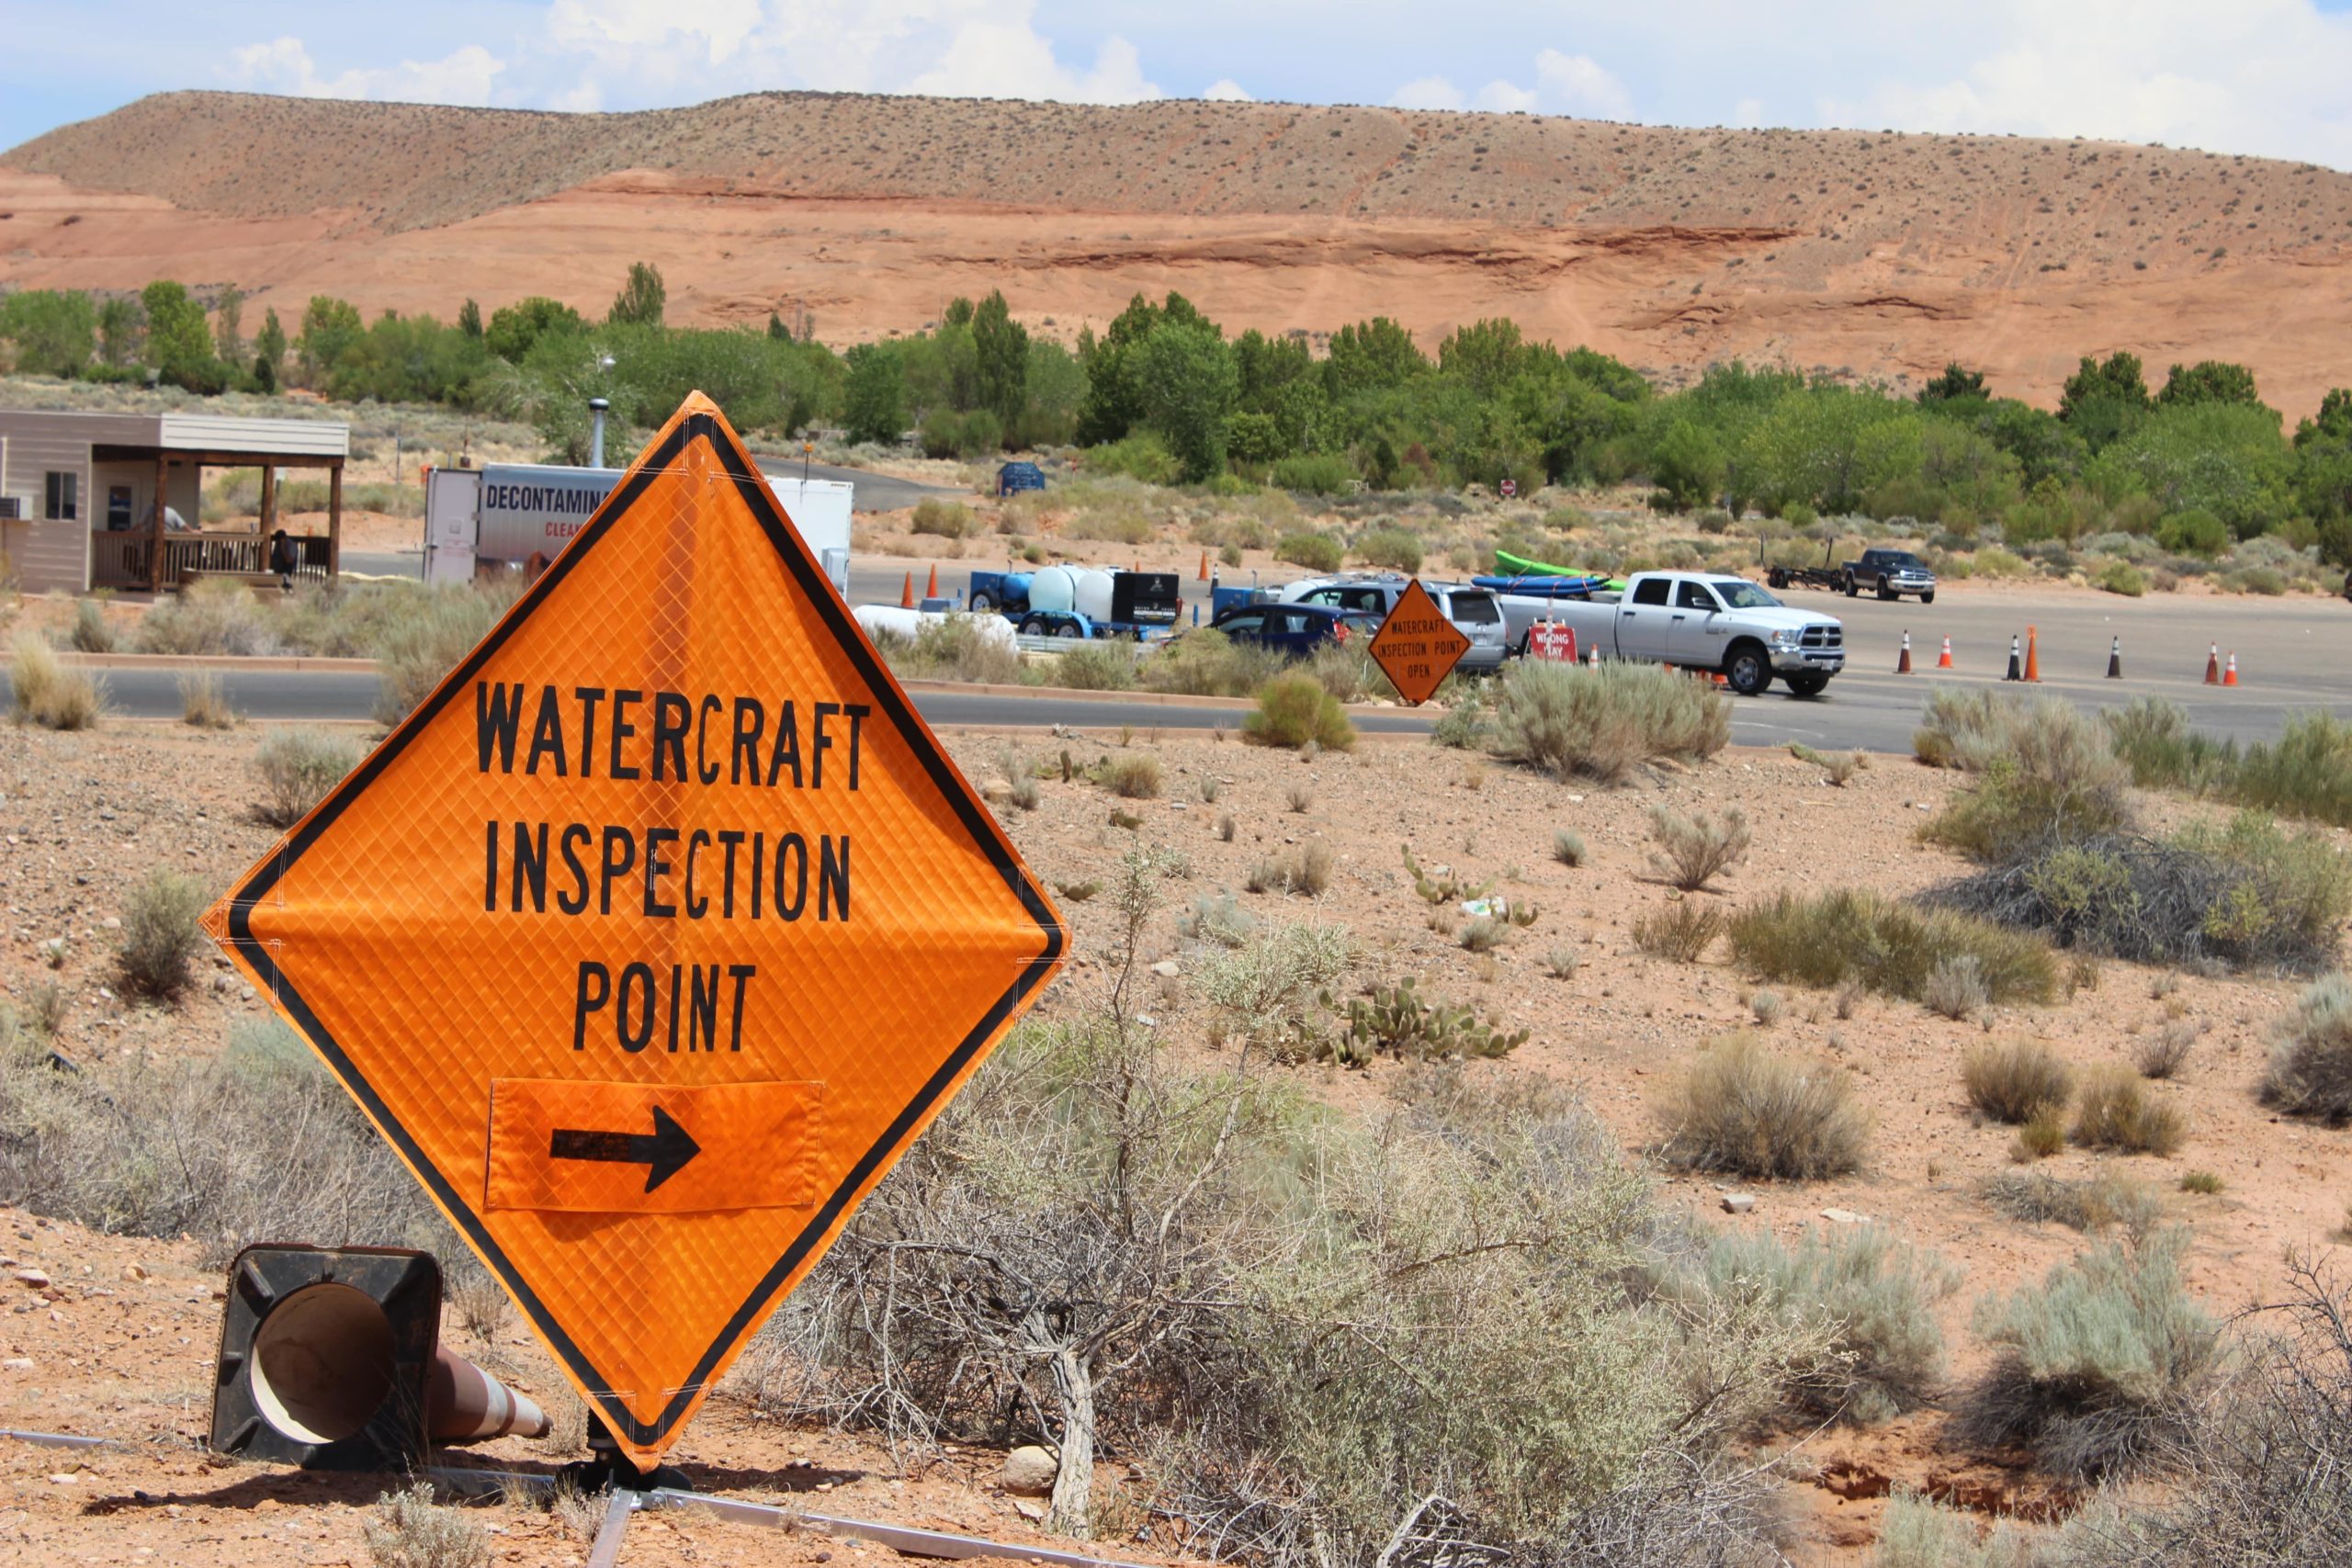 Watercraft Inspection Point. It is unlawful to drive past an open inspection station when carrying watercraft. Courtesy & Copyright Utah Division of Wildlife Resources, Faith Jolley, Photographer